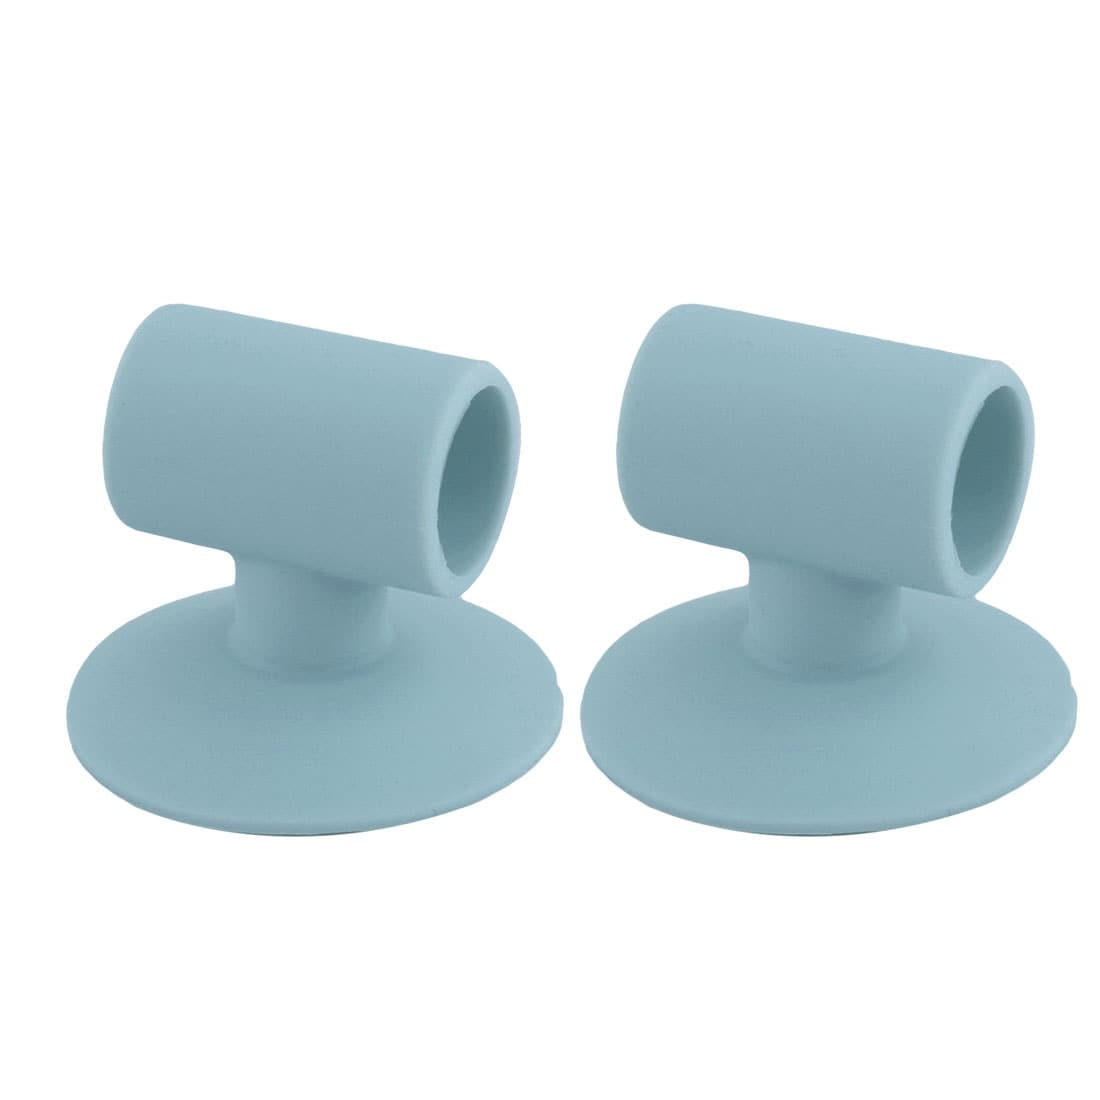 Home Room Rubber Suction Cup Door Handle Knob Stopper Wall Protector 2pcs